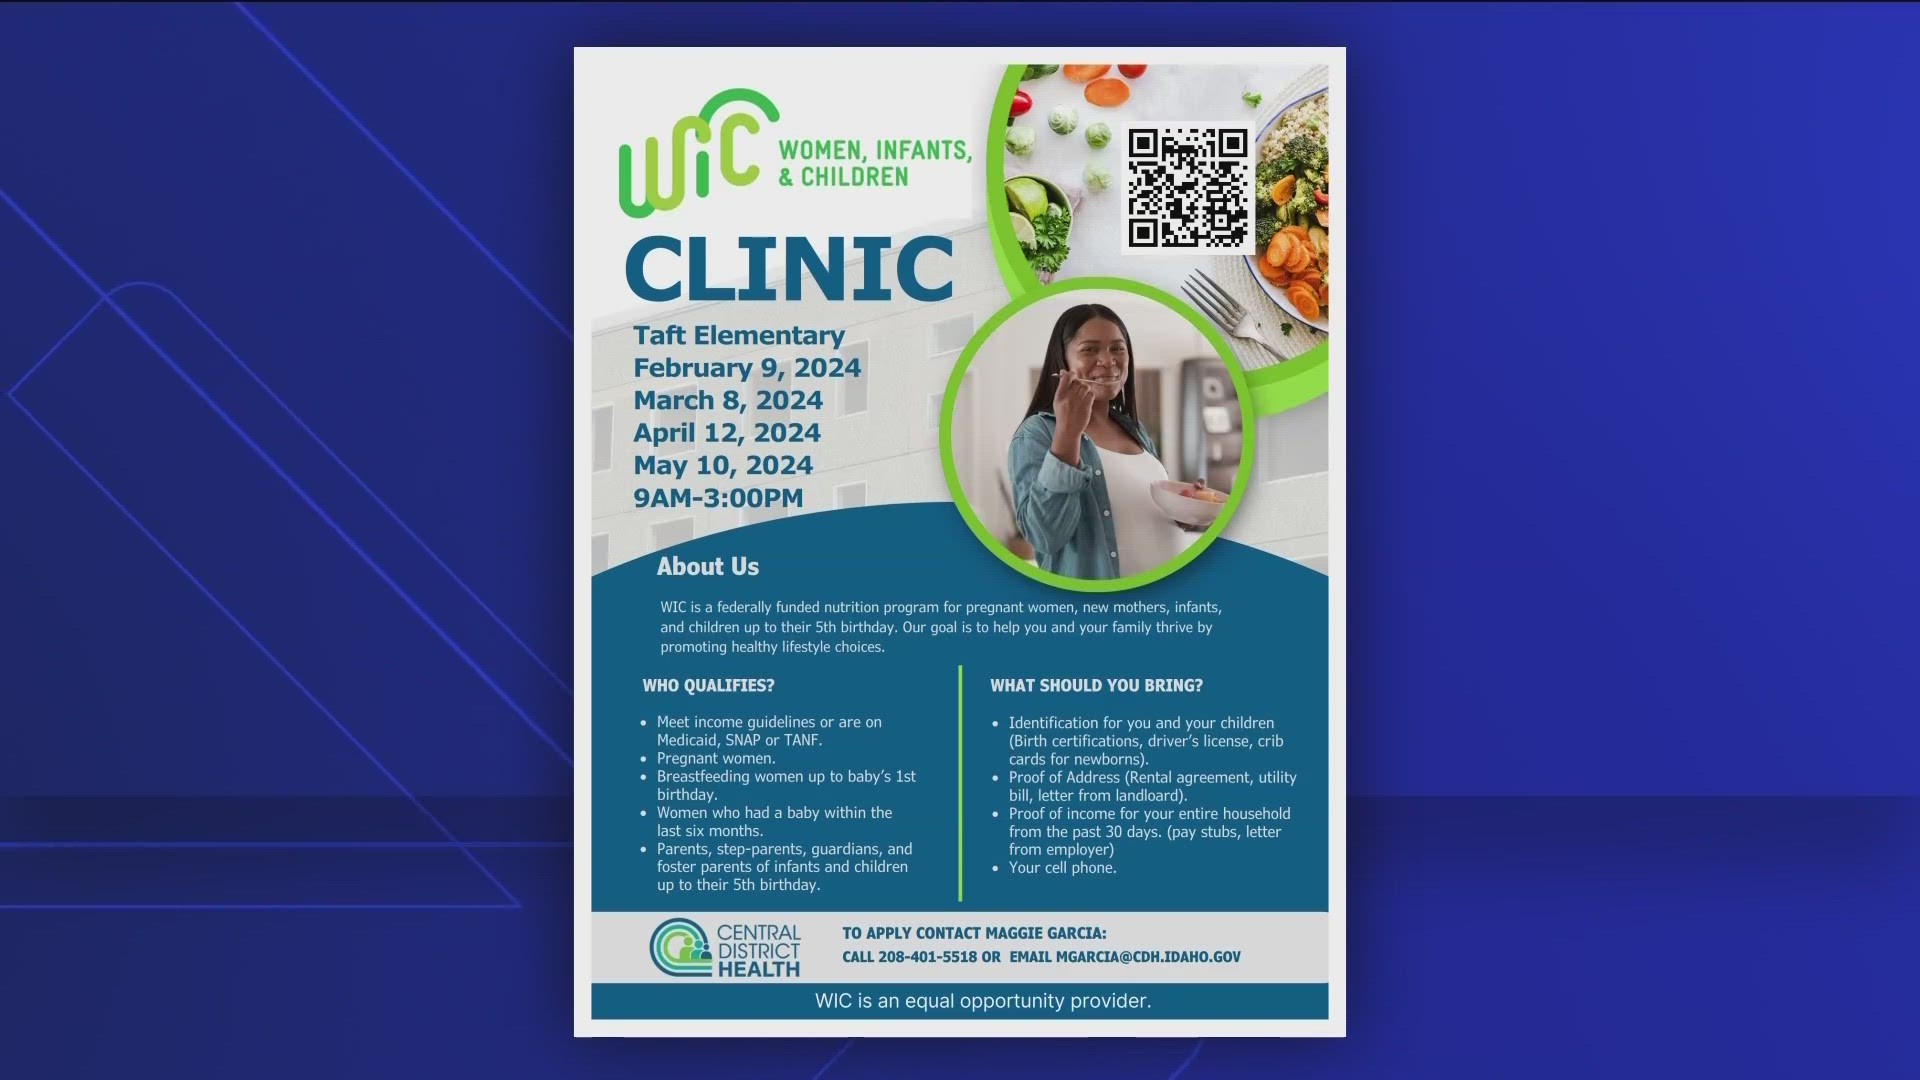 Central District Health is partnering with the Boise School District to offer free WIC clinics for qualifying families.